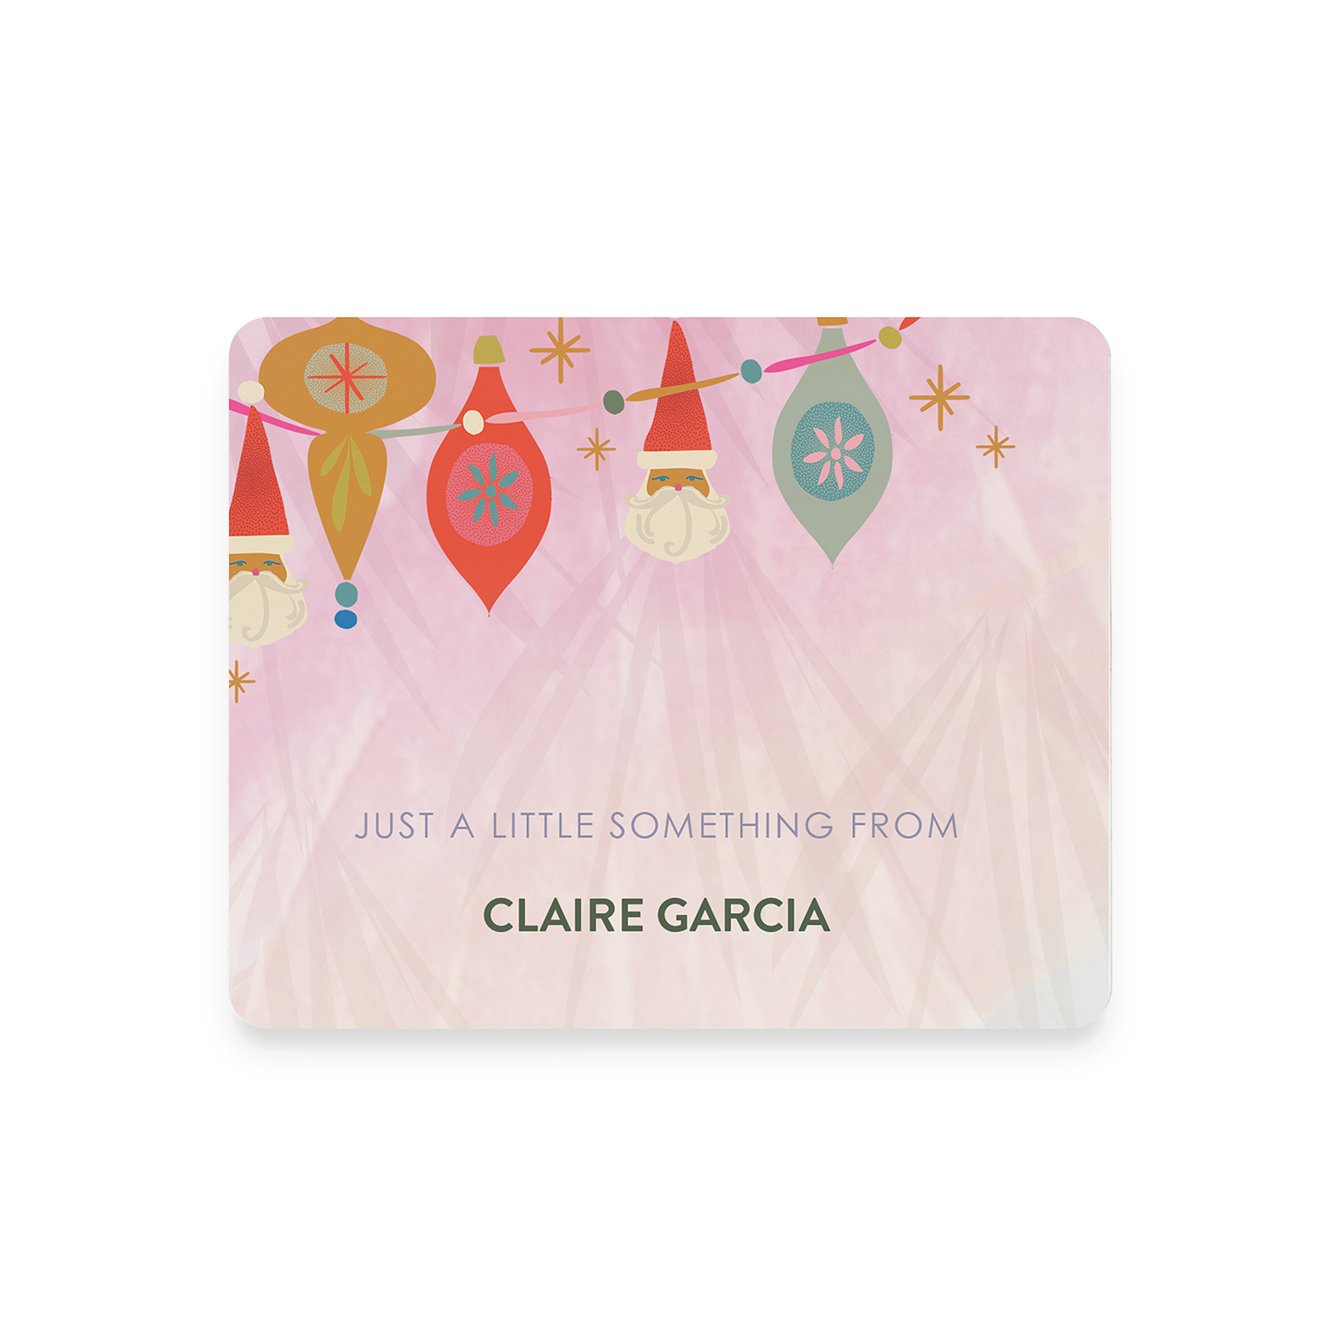 Festive Ornaments Gift Labels Personalized by Erin Condren